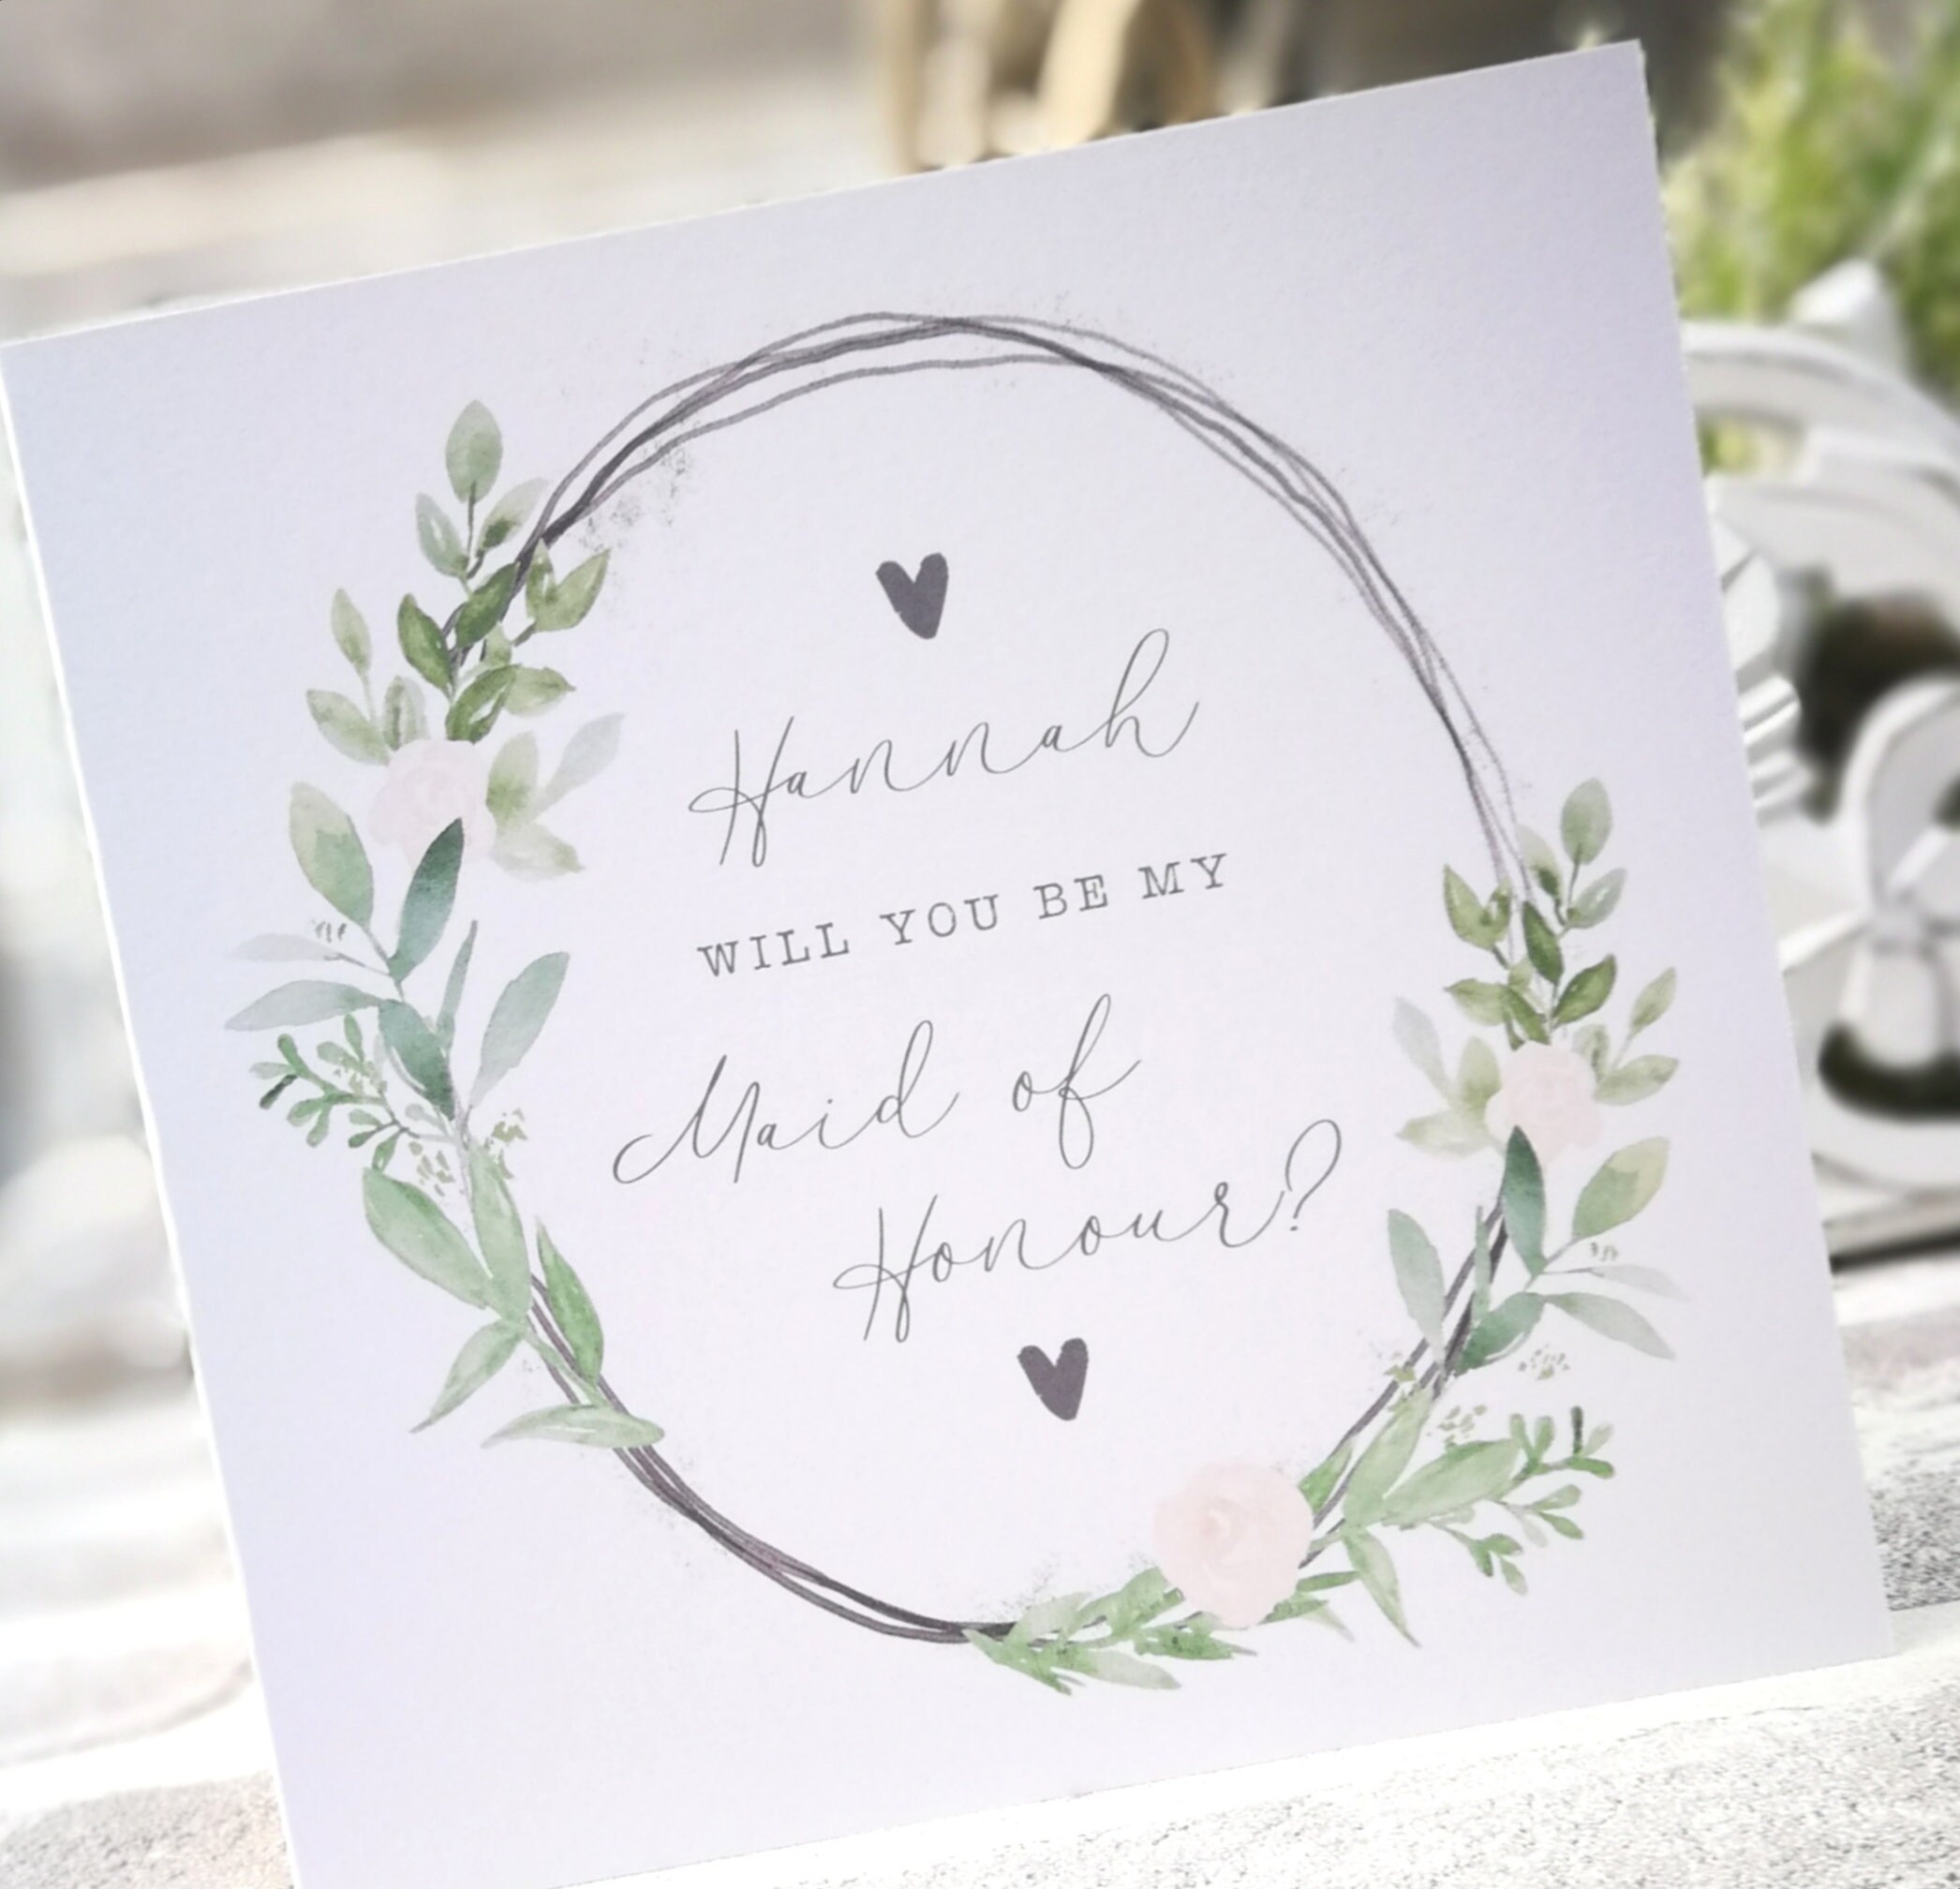 Personalised Will You Be My Maid, Matron, Or Man Of Honour Card. Rustic, Greenery, Botanical, Country Floral